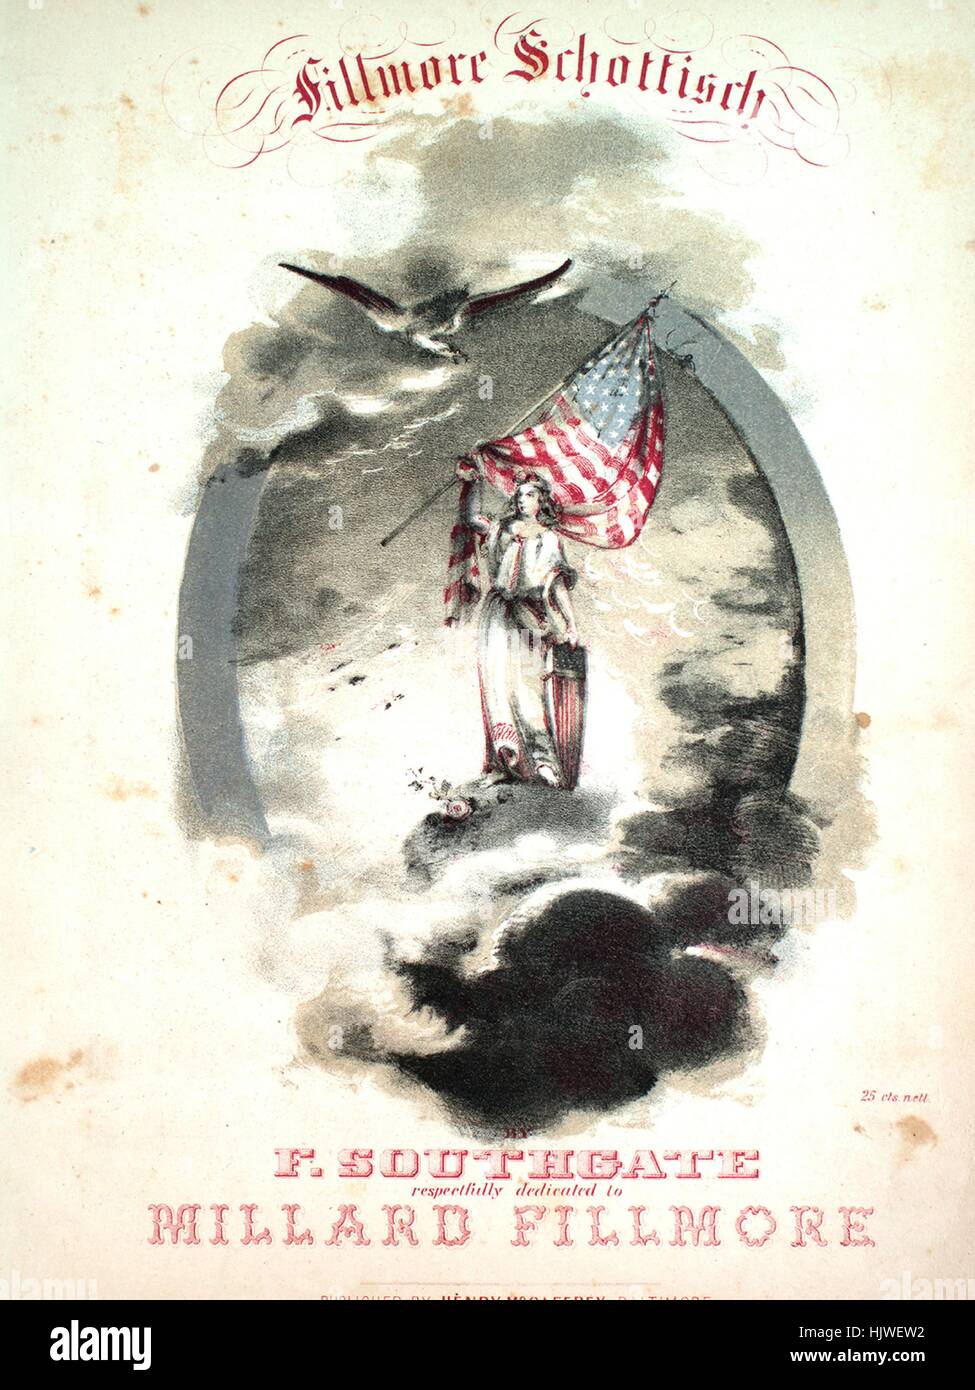 Sheet music cover image of the song 'Fillmore Schottisch', with original authorship notes reading 'F Southgate', United States, 1856. The publisher is listed as 'Henry McCaffrey', the form of composition is 'da capo', the instrumentation is 'piano', the first line reads 'None', and the illustration artist is listed as 'Webb'. Stock Photo